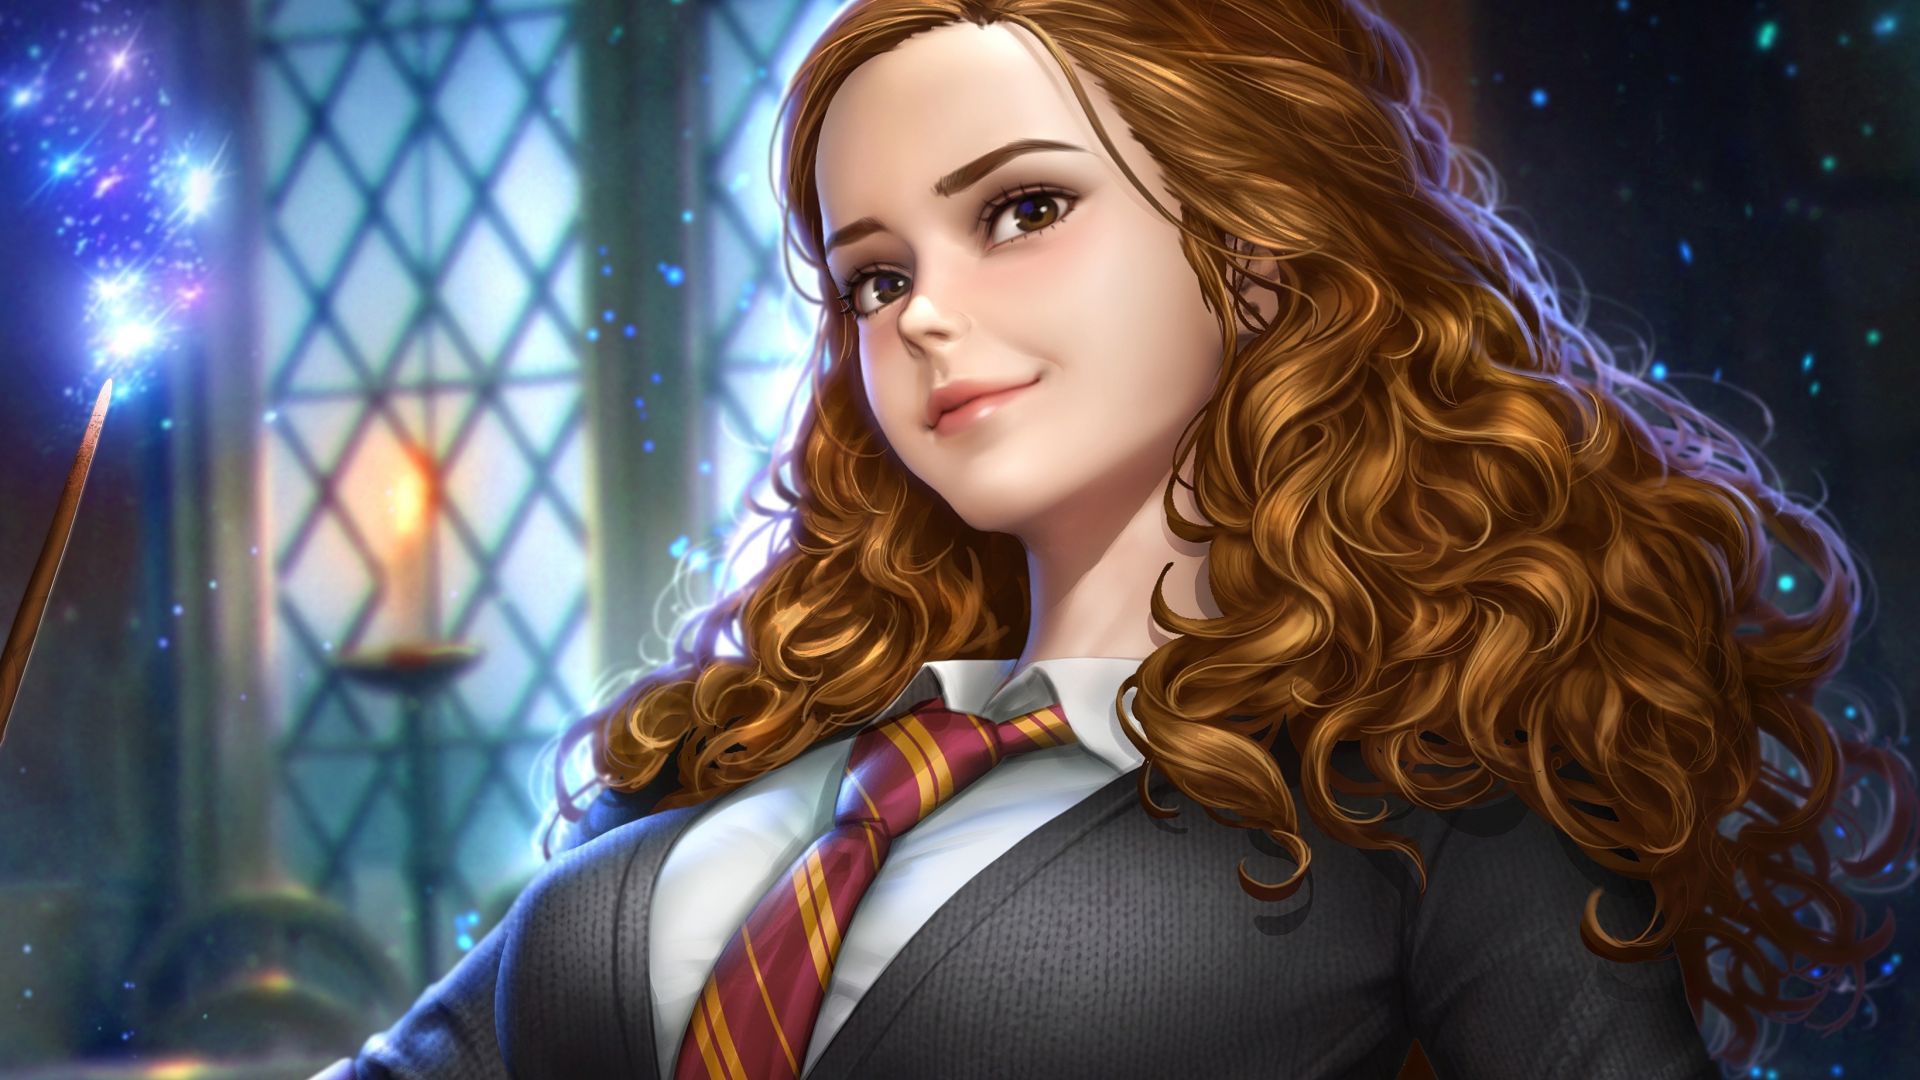 Harry Potter Wallpapers For Girls